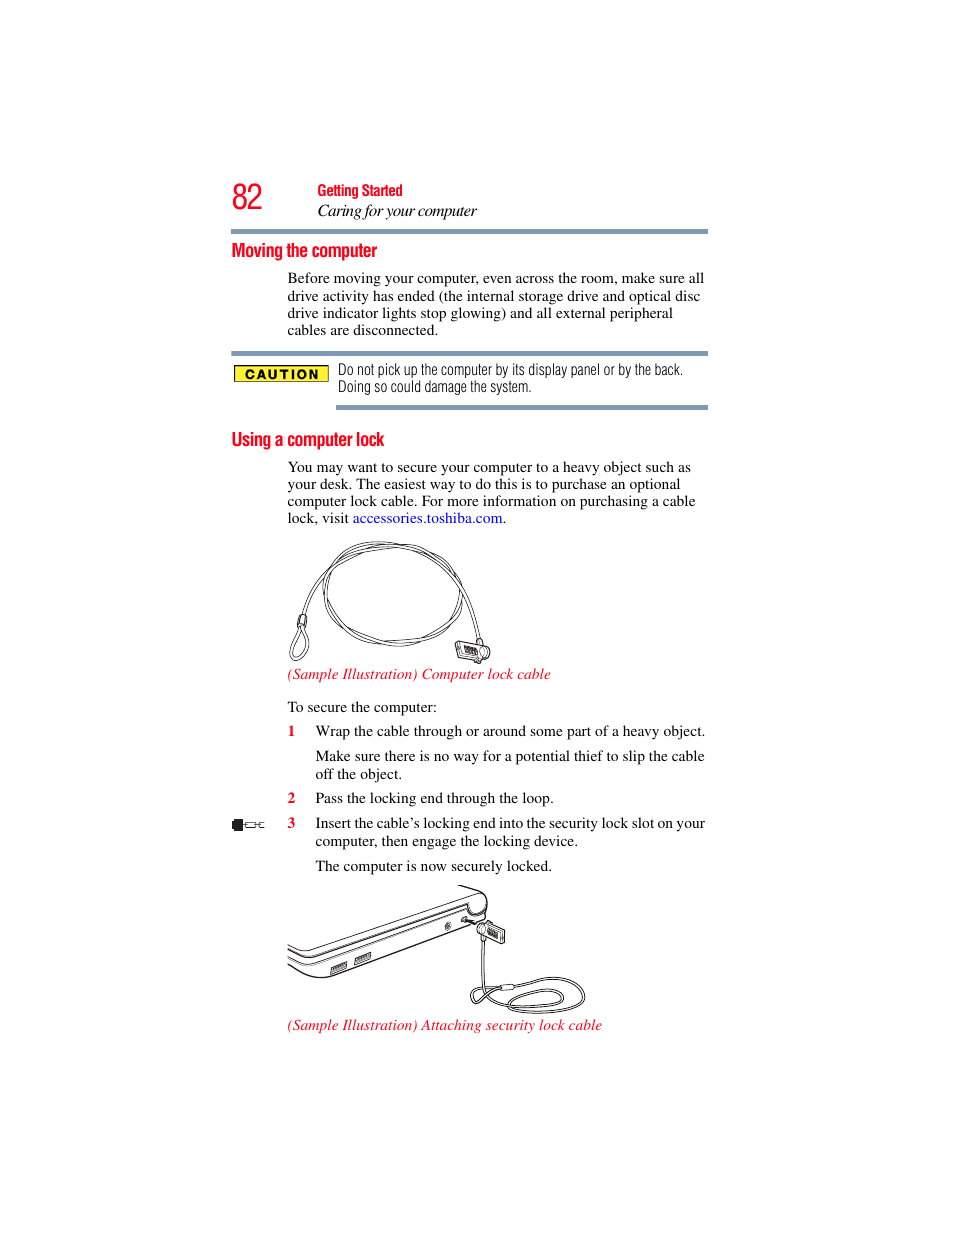 Moving the computer, Using a computer lock, Moving the computer using a computer lock | Toshiba NB250 User Manual | Page 82 / 197